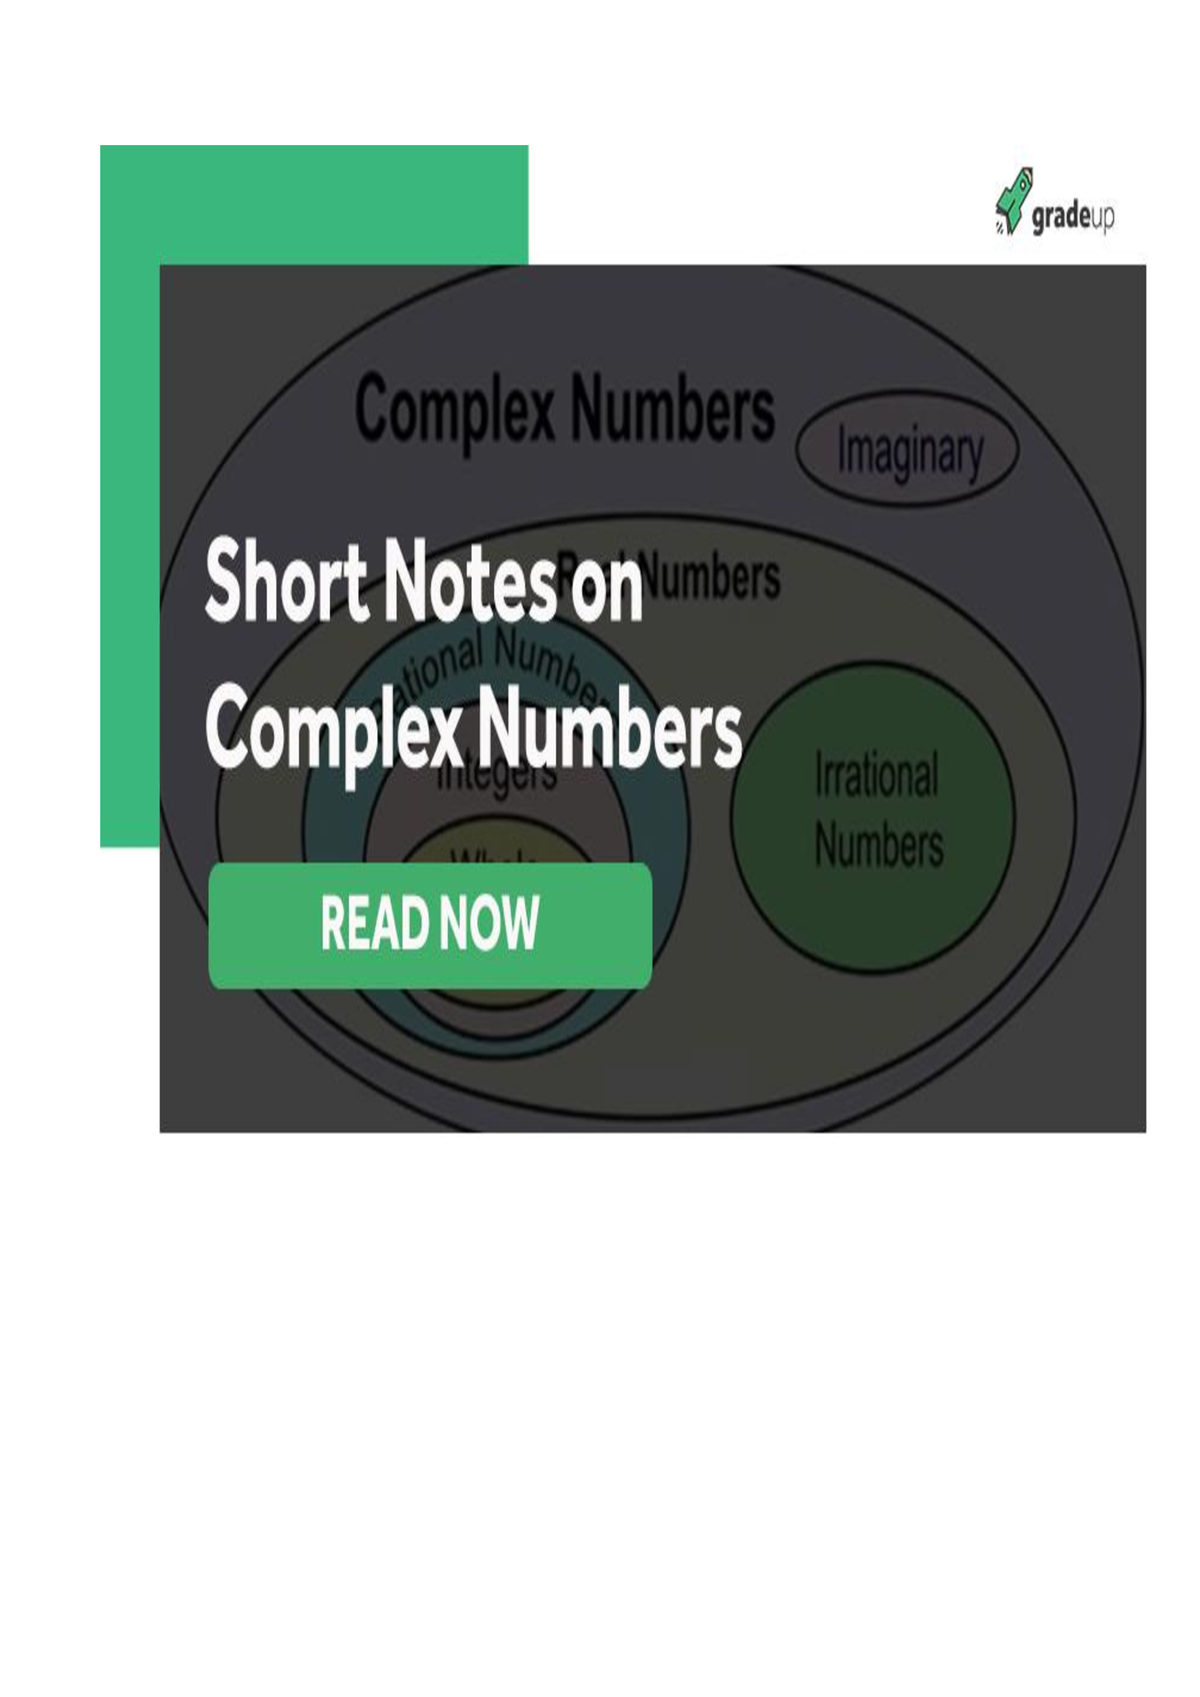 short-notes-complex-numbers-complex-number-is-an-important-topic-from